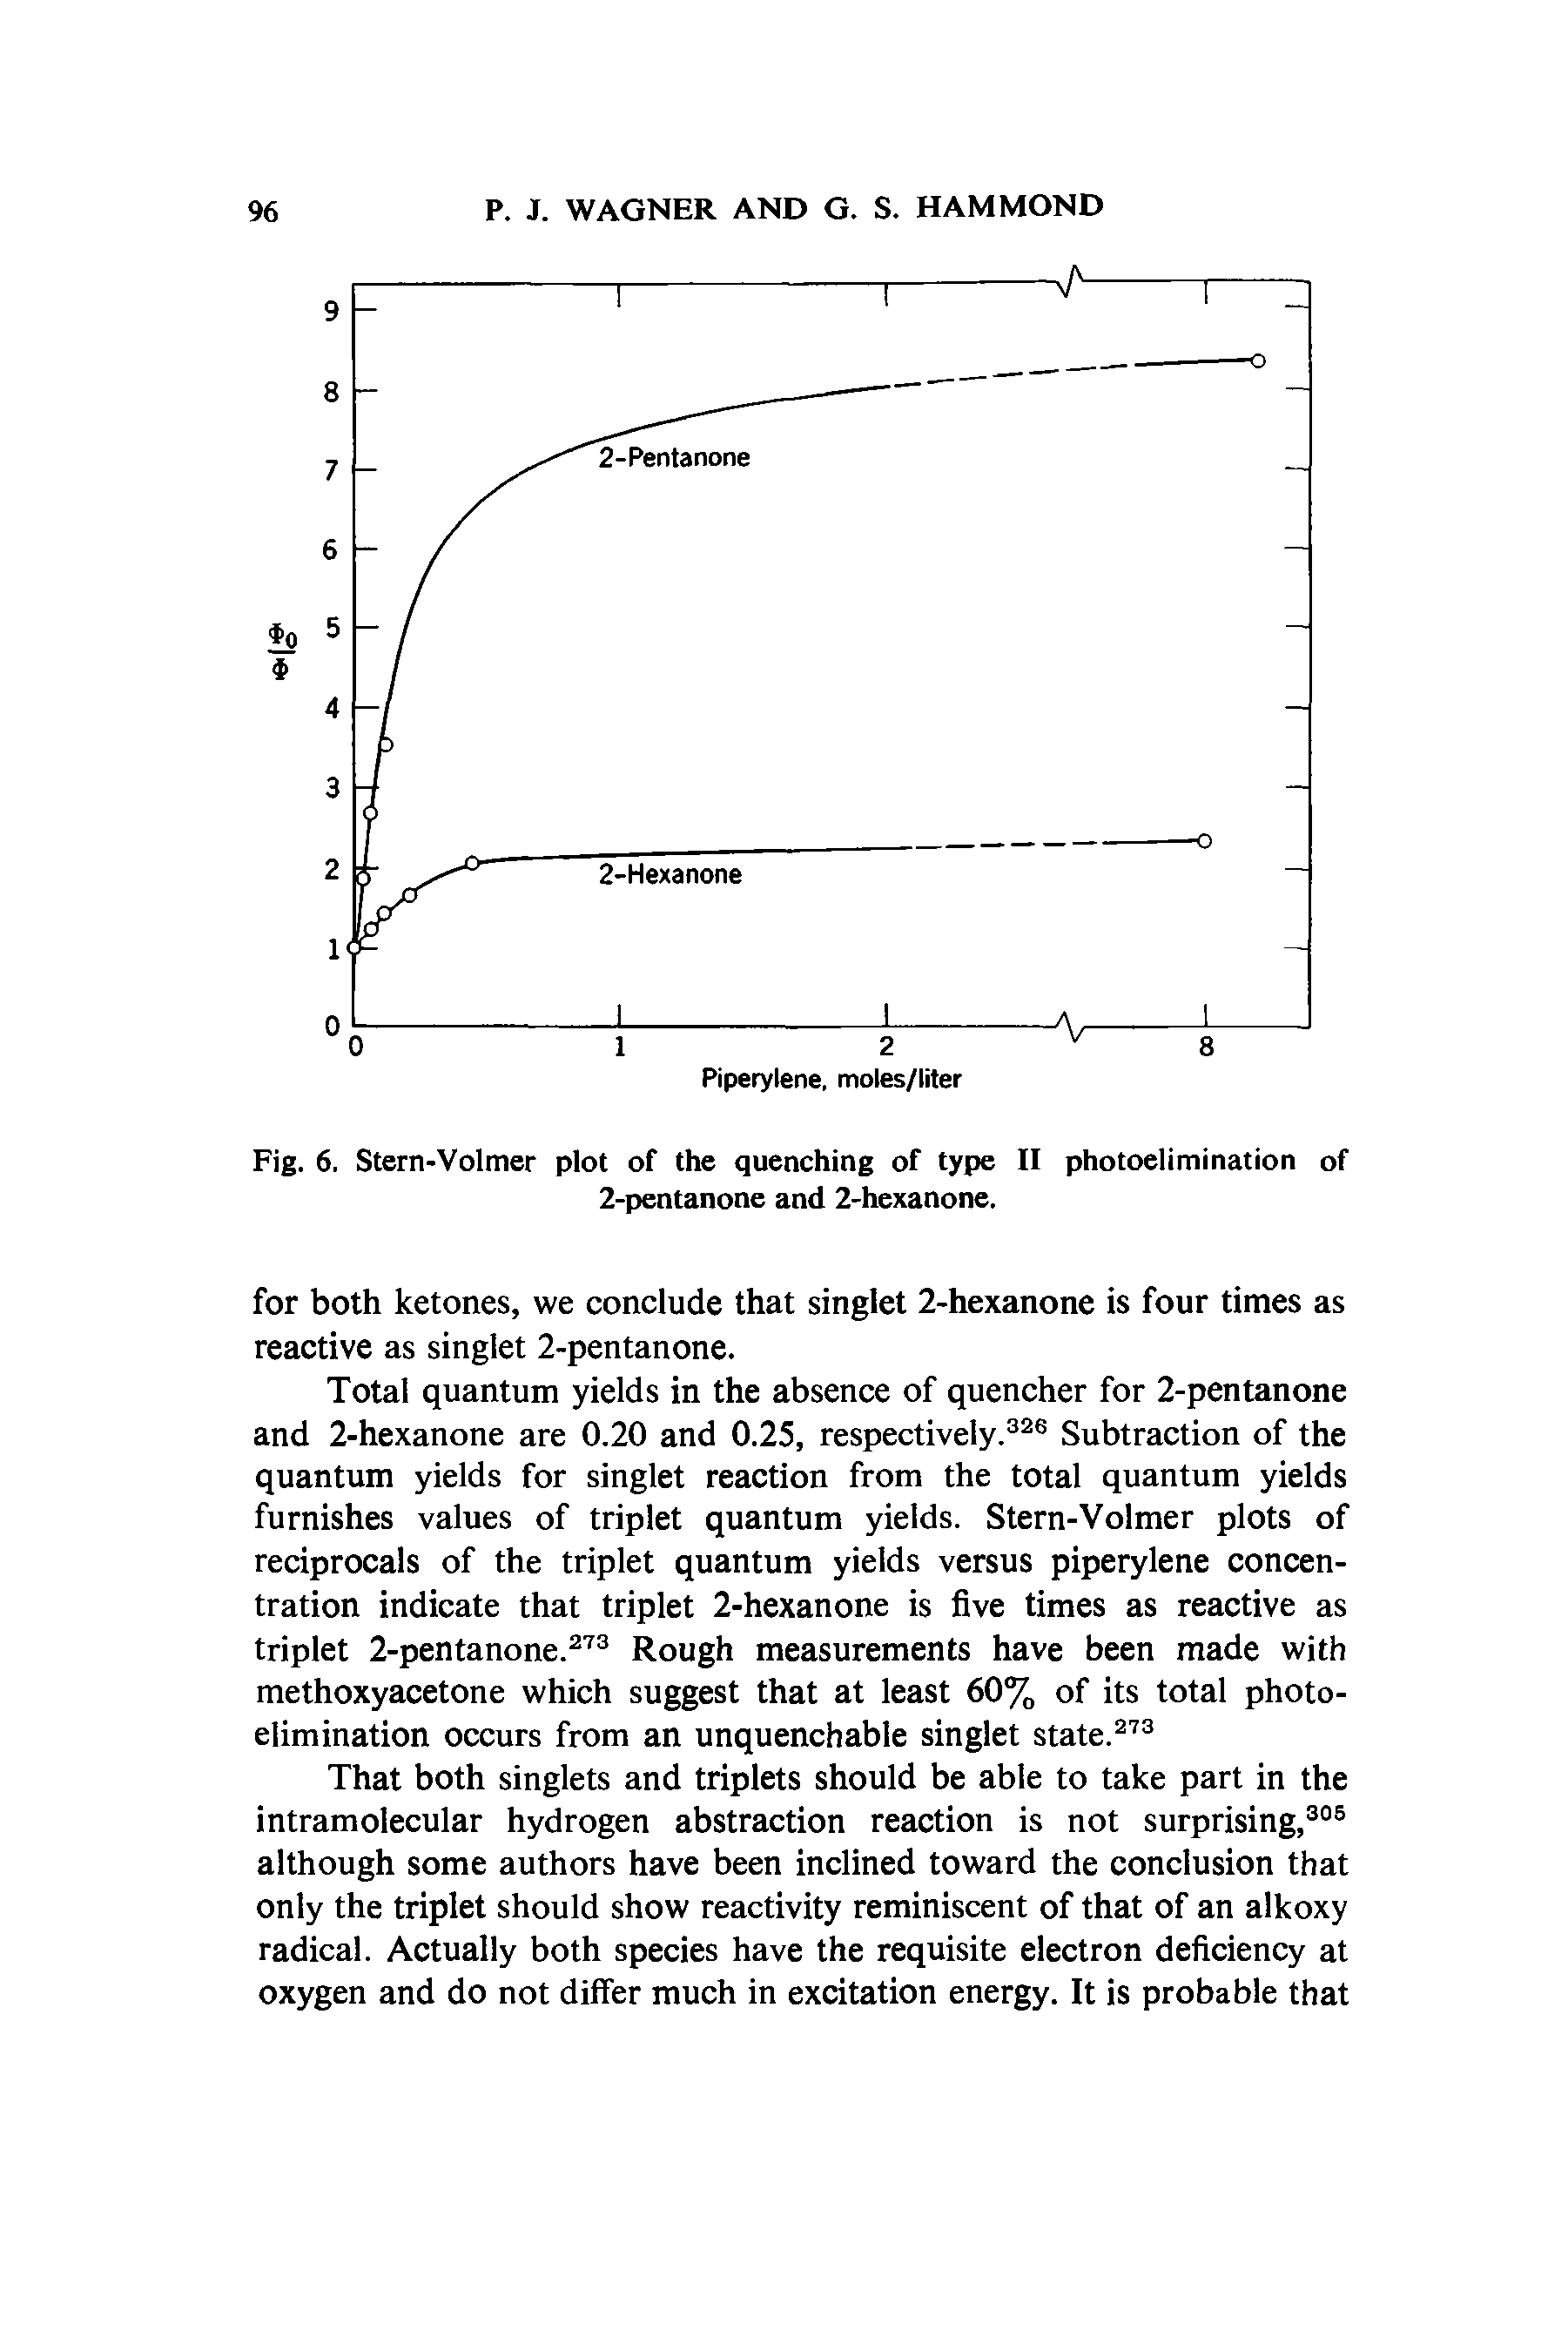 Fig. 6. Stern-Volmer plot of the quenching of type II photoelimination of 2-pentanone and 2-hexanone.